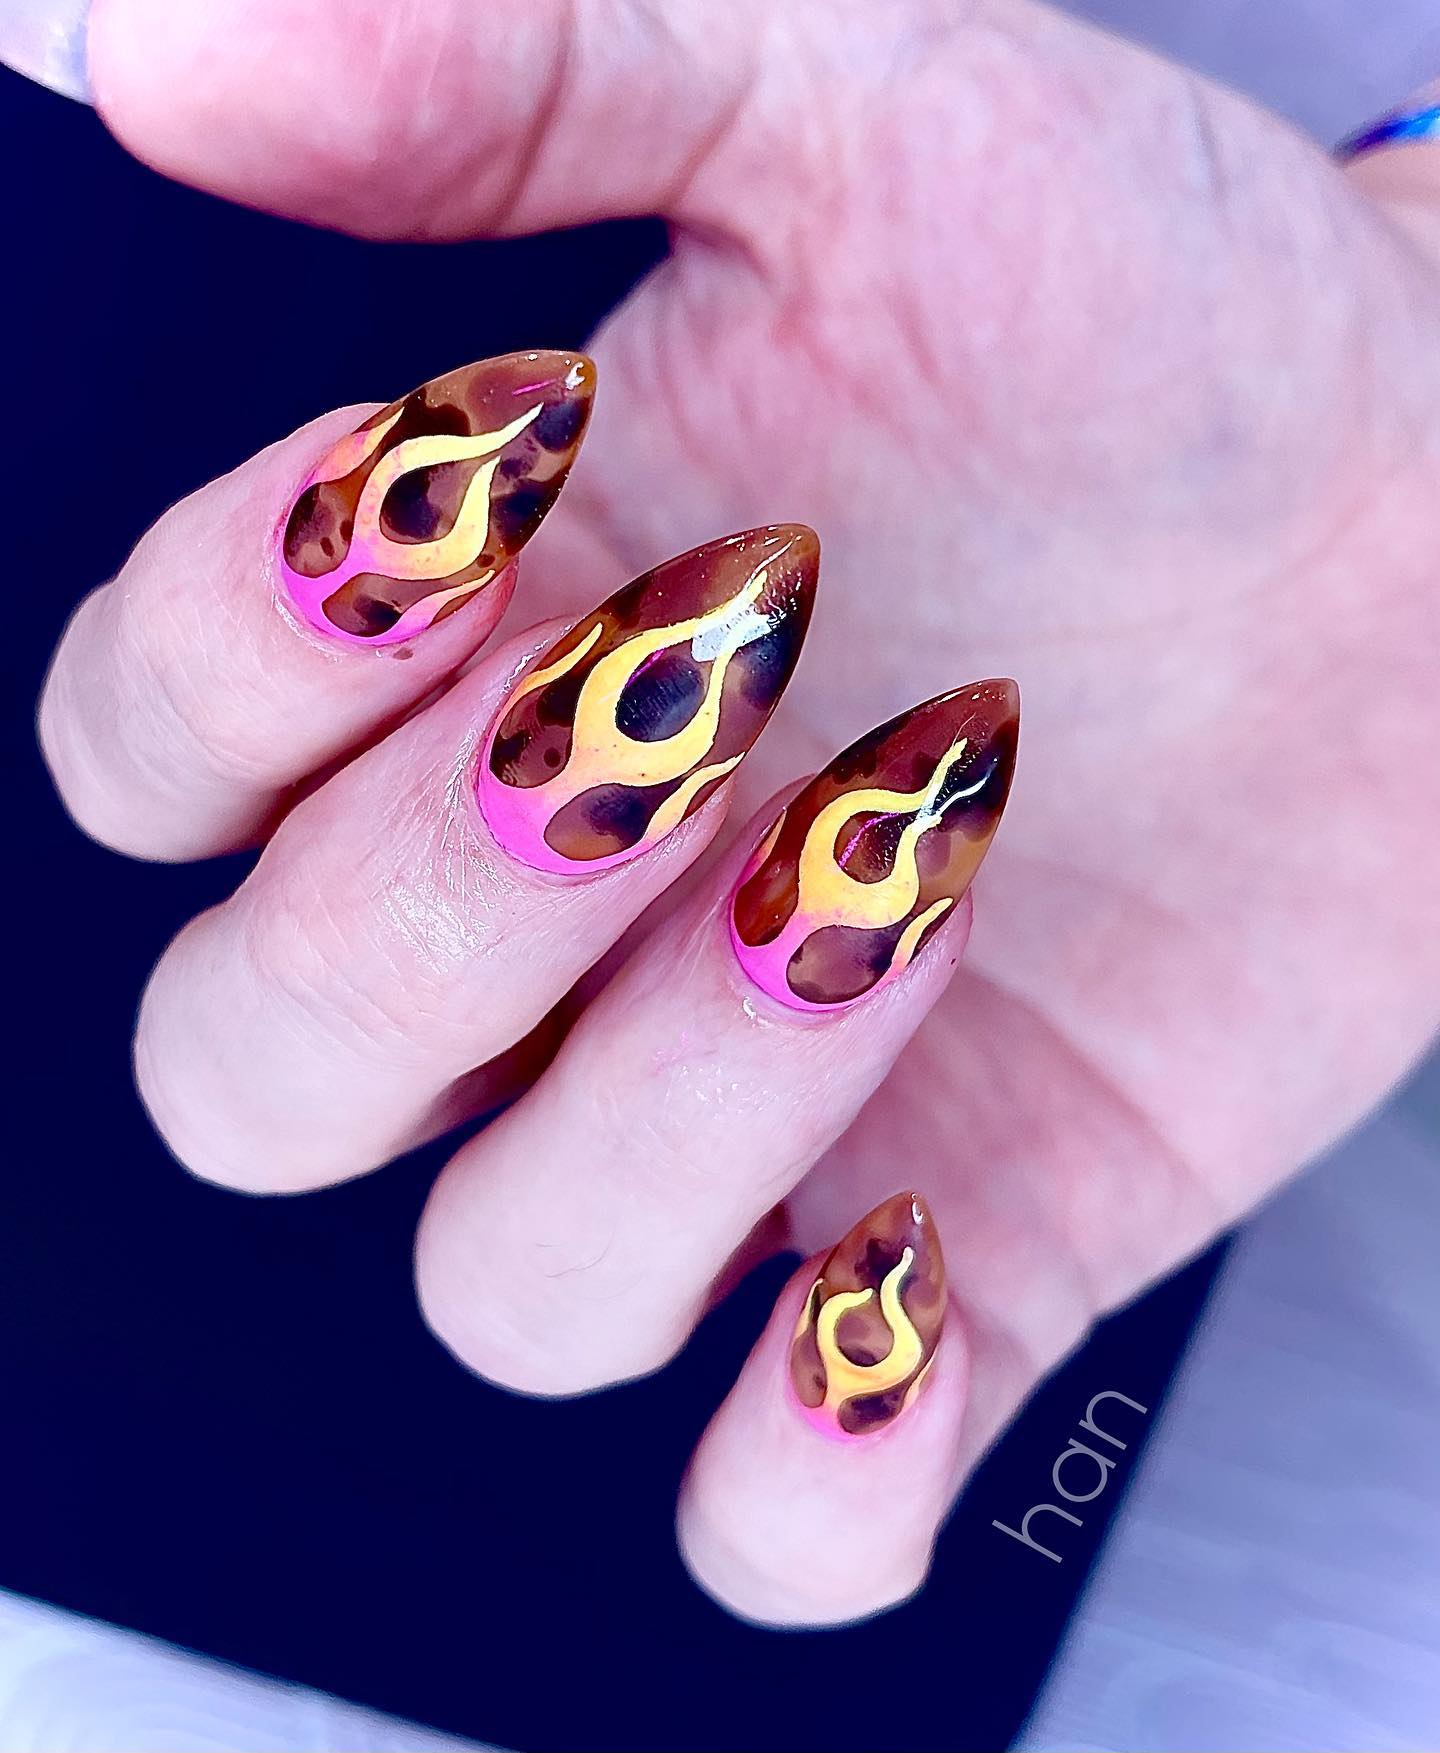  One of the most favourite nail ideas for Autumn is definitely tortoisehell nails. It offers a quite a chic look with its speckled caramel design. Yellow flames are highlighted on top the nails, so go for it.